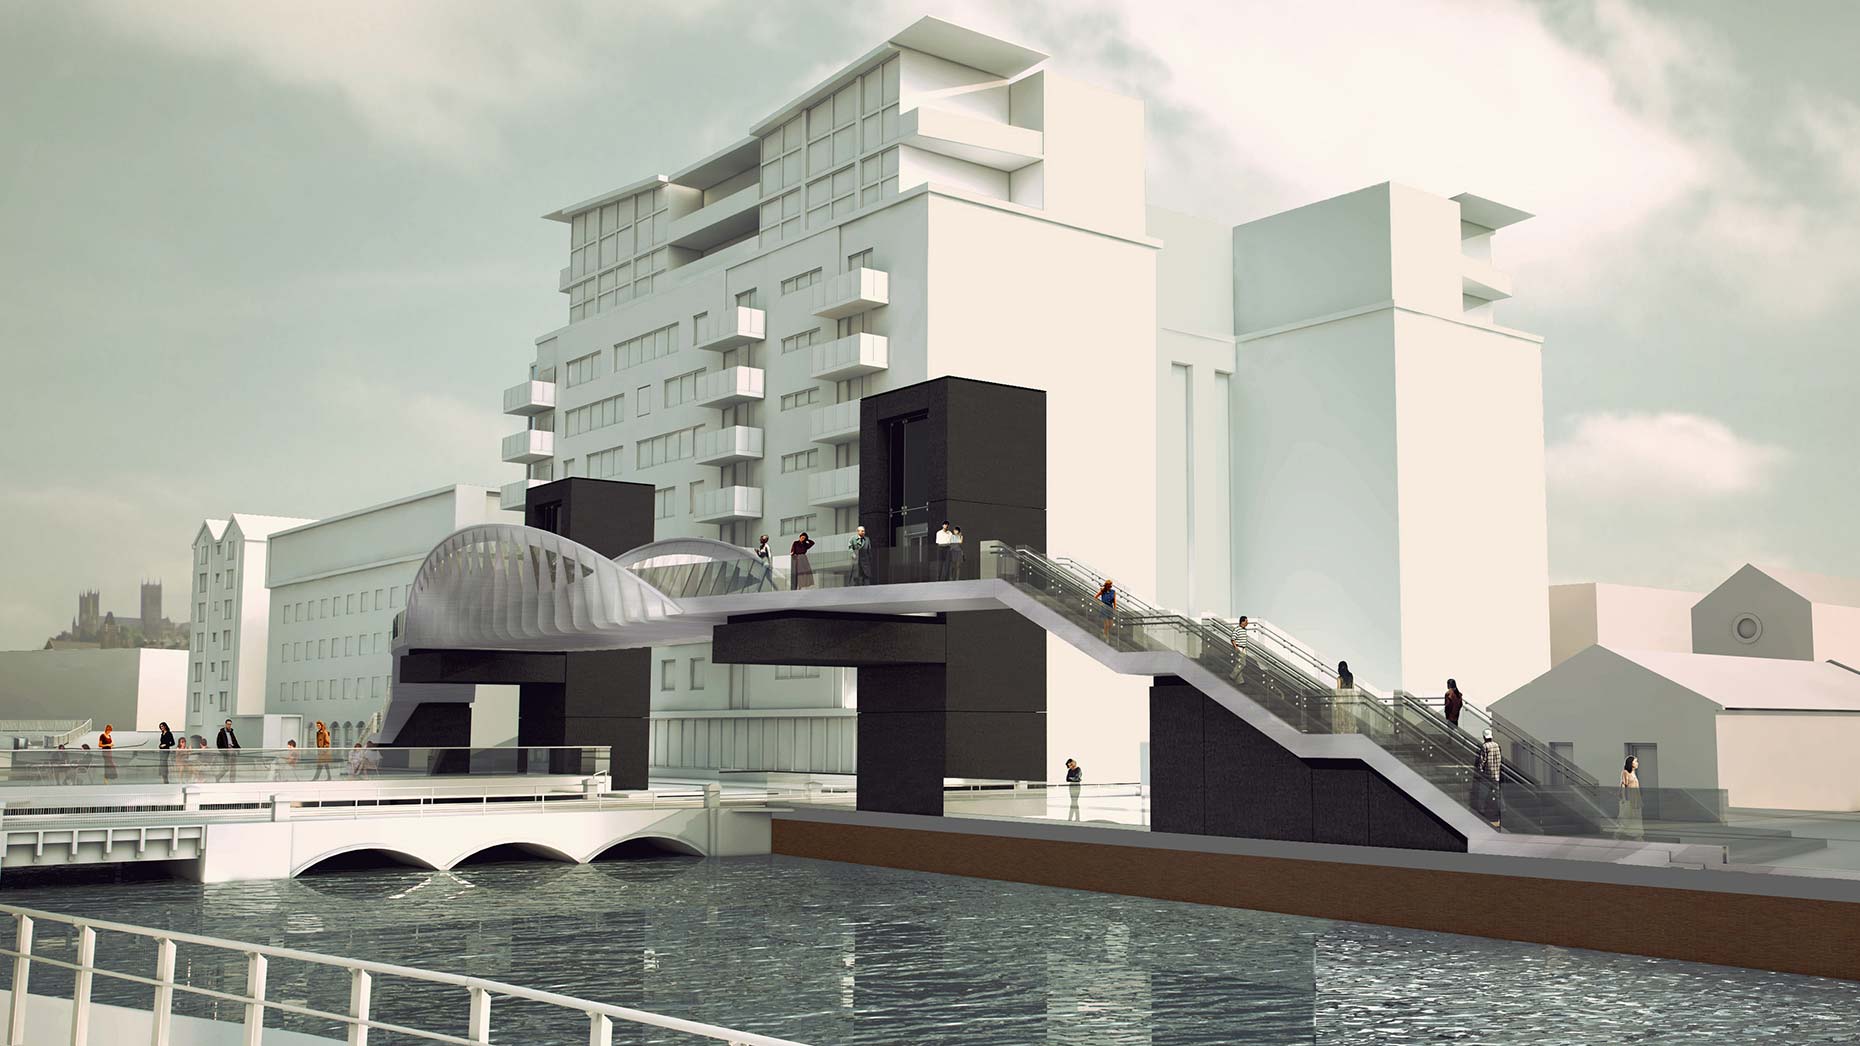 The new Brayford level crossing bridge designs from Network Rail, by Stem Architects